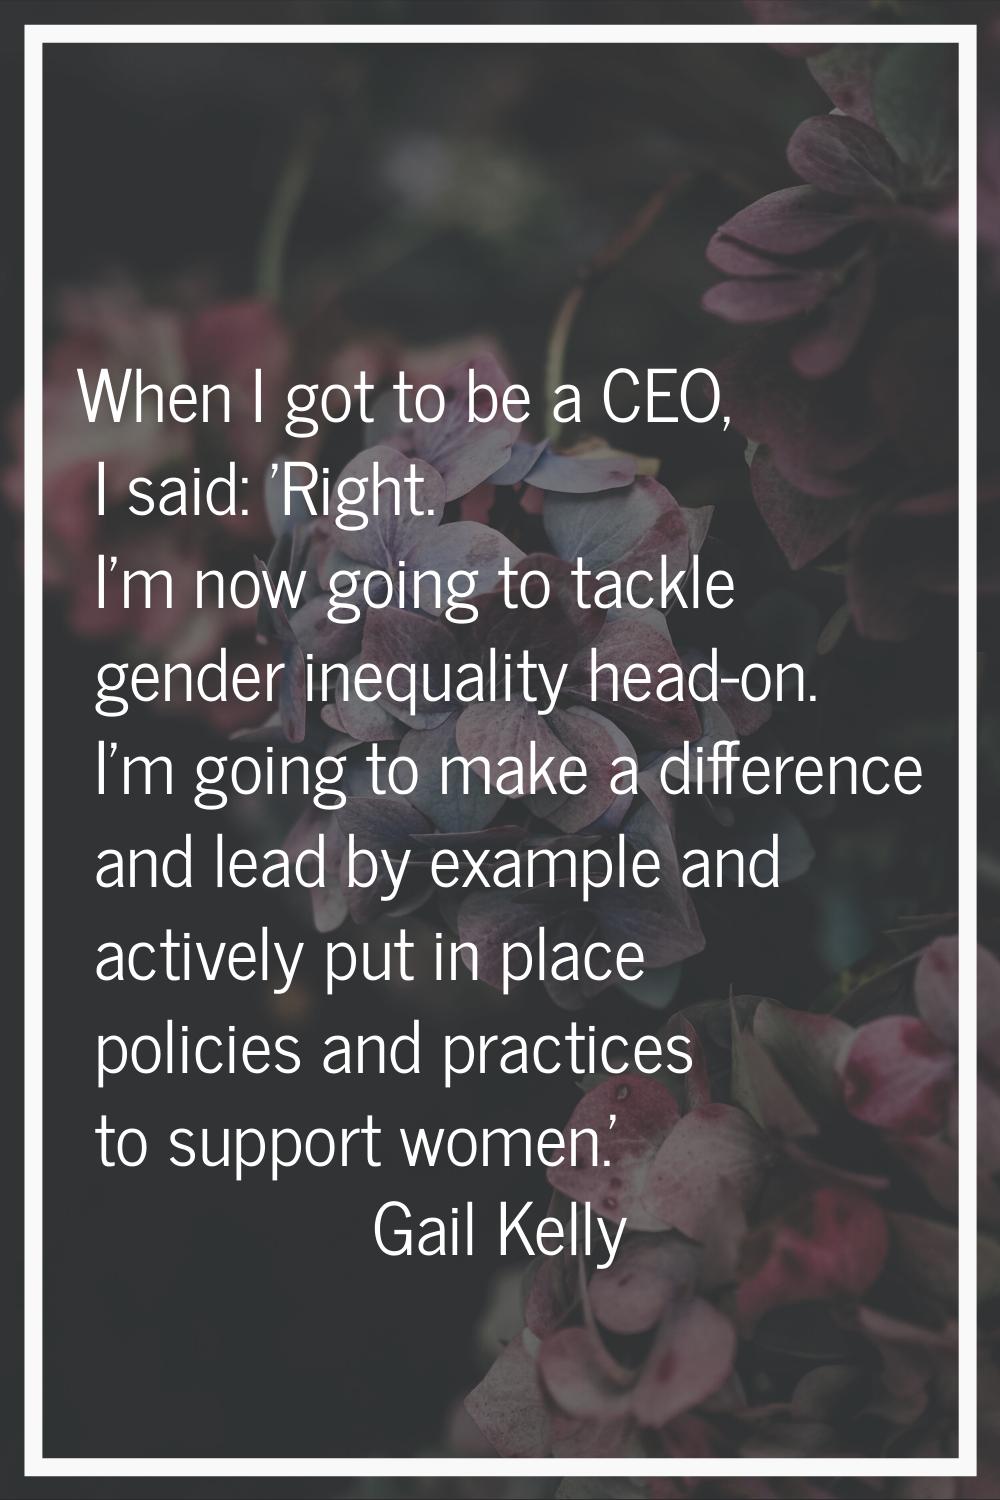 When I got to be a CEO, I said: 'Right. I'm now going to tackle gender inequality head-on. I'm goin